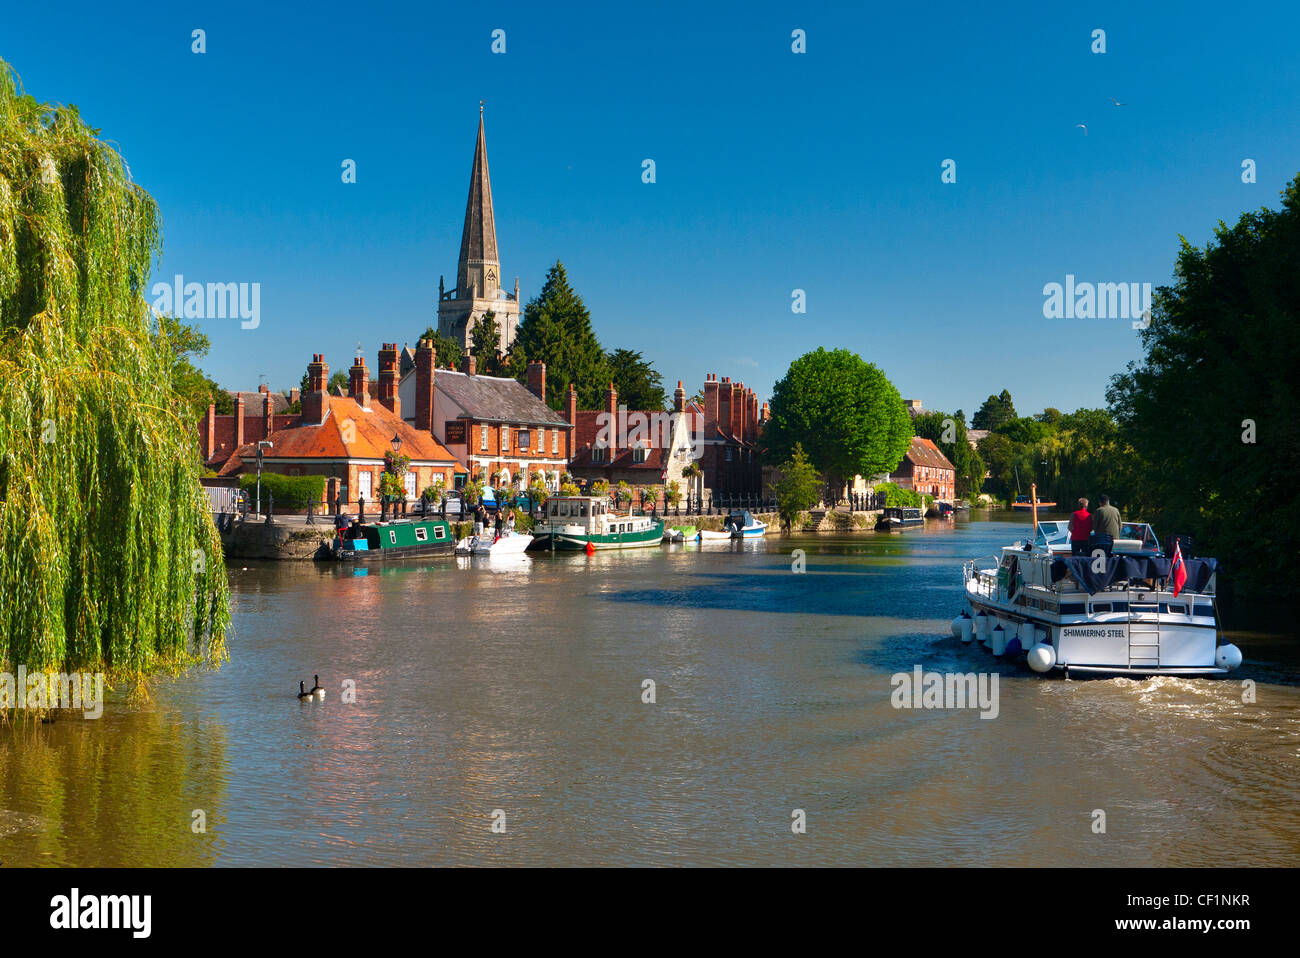 St Helen's Church overlooking boats on the River Thames in summer 2 Stock Photo